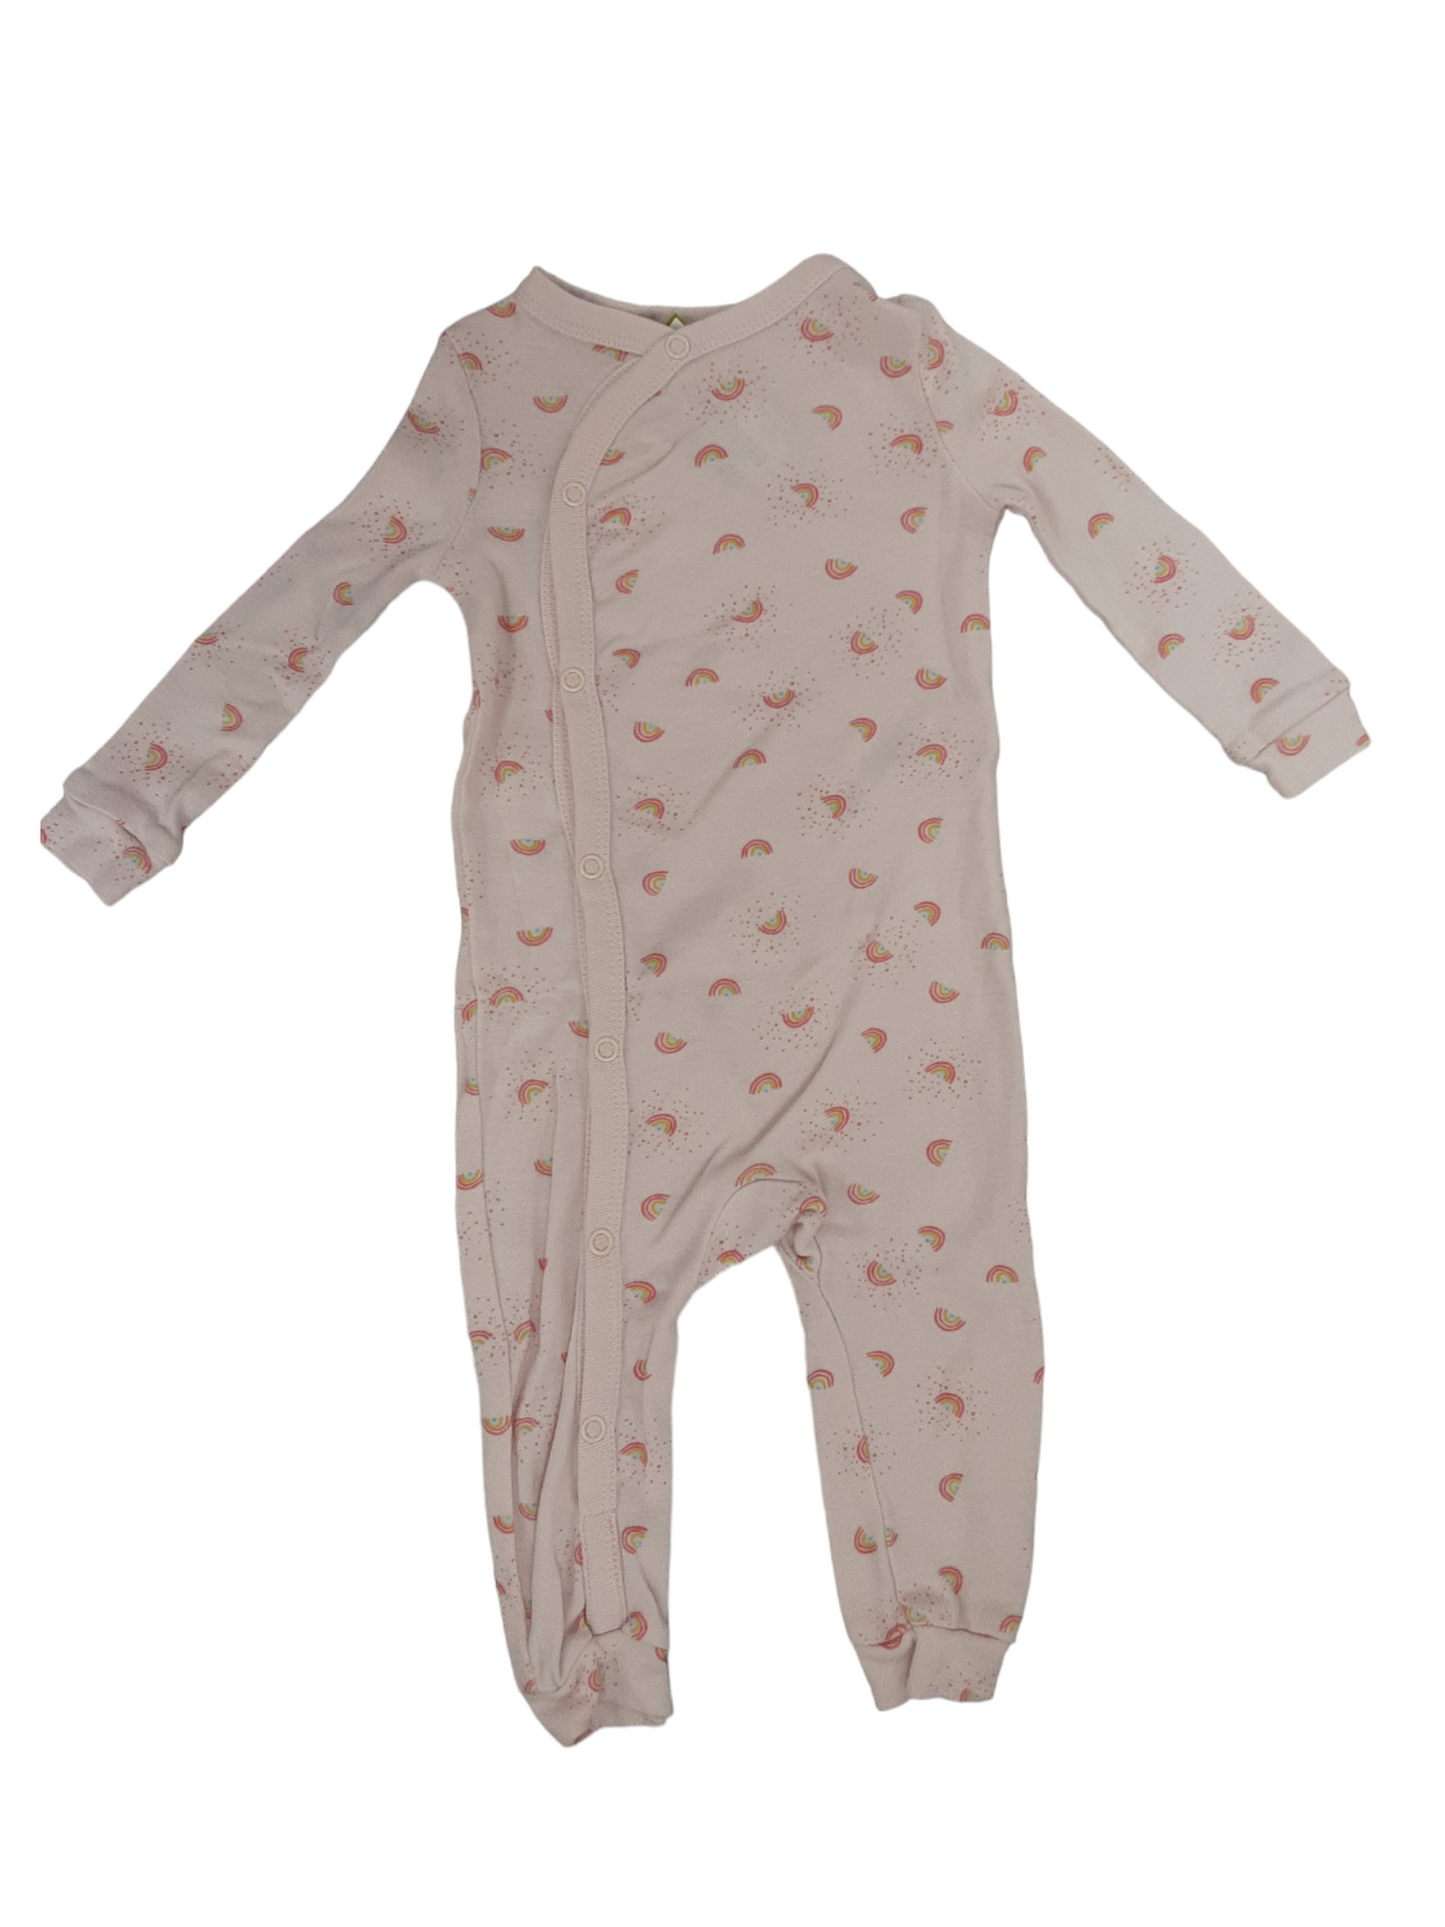 Comfy rainbow sleeper size 6 to 9 months